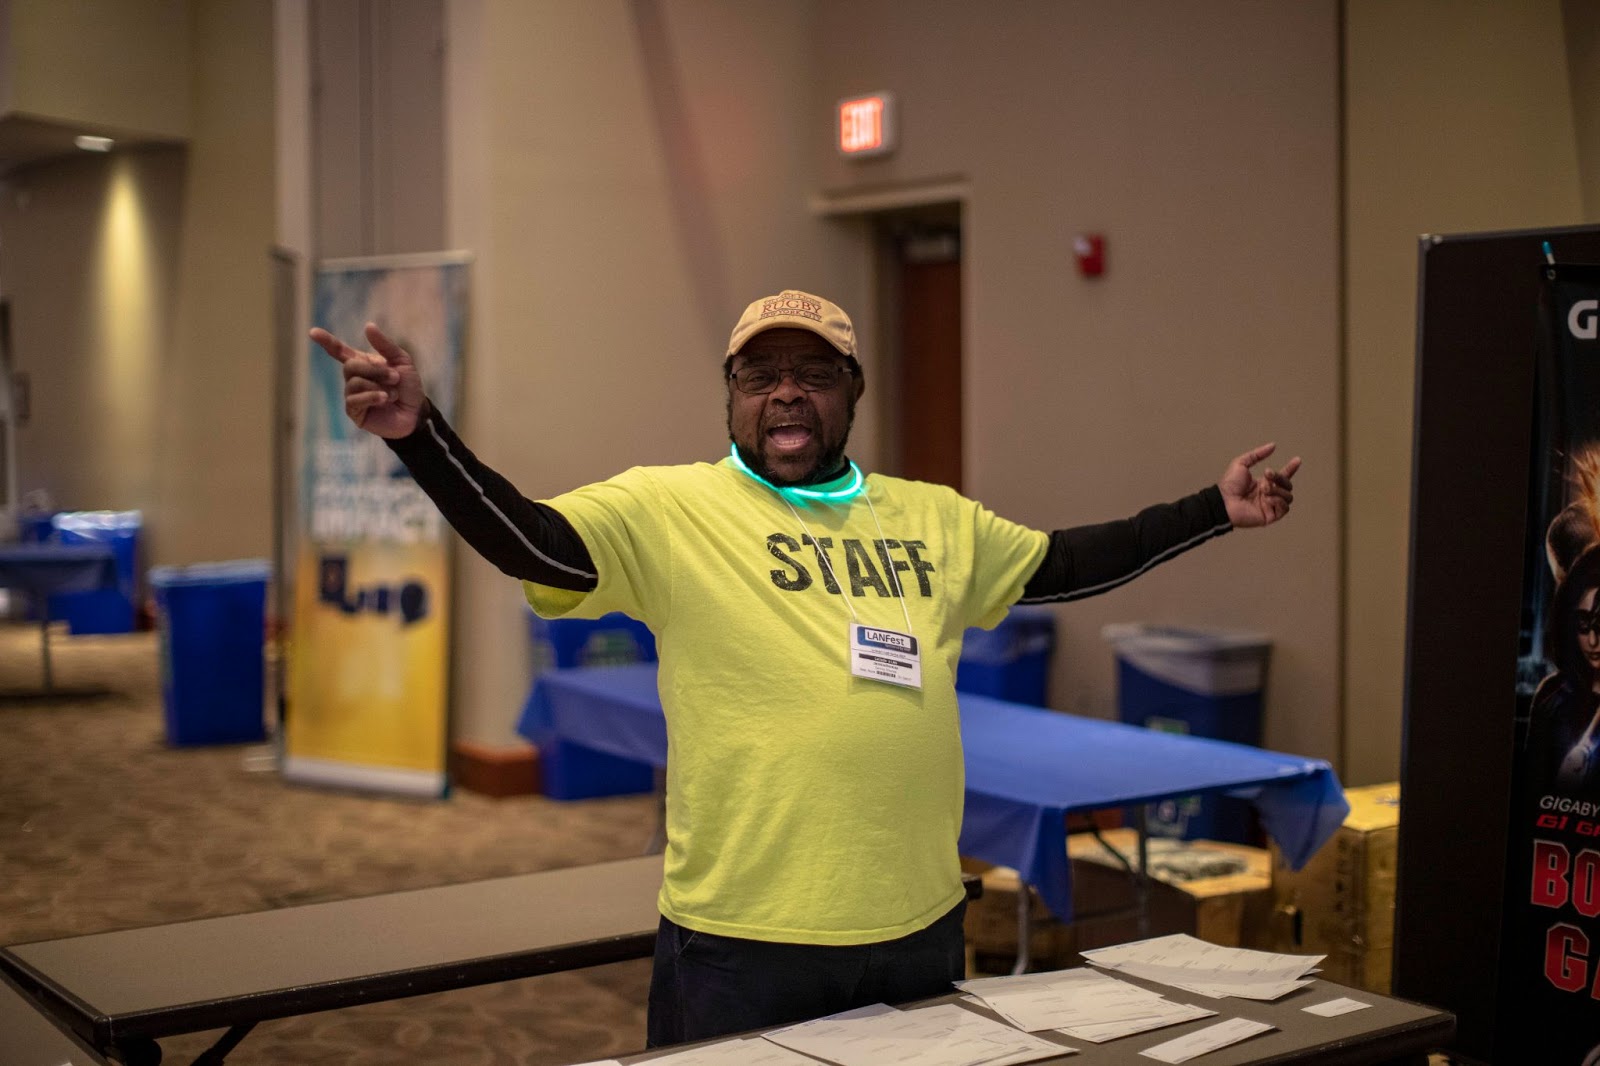 LANFest runs over 28 events each year with local volunteers ready to accomplish good.  Let us provide staff for your event.